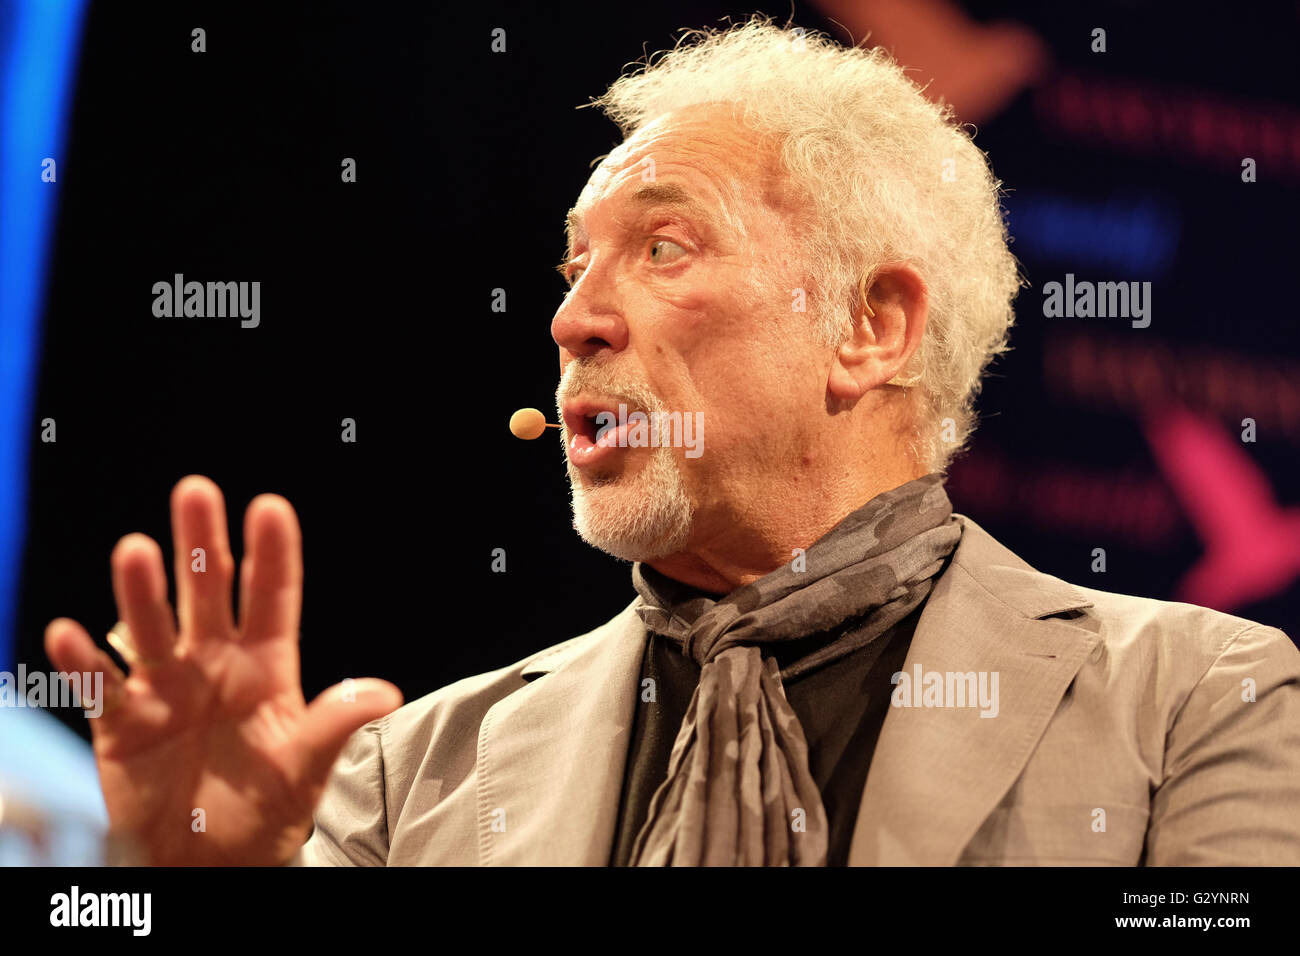 Hay Festival, Wales, UK - Sunday 5th June 2016 -  Tom Jones on stage at the Hay Festival before a sell out audience to talk about his life and his book Over the Top and Back. This is Tom's first public appearance since the recent death of his wife. Today is the final day of the eleven day literary and arts festival. Photograph Steven May / Alamy Live News Stock Photo